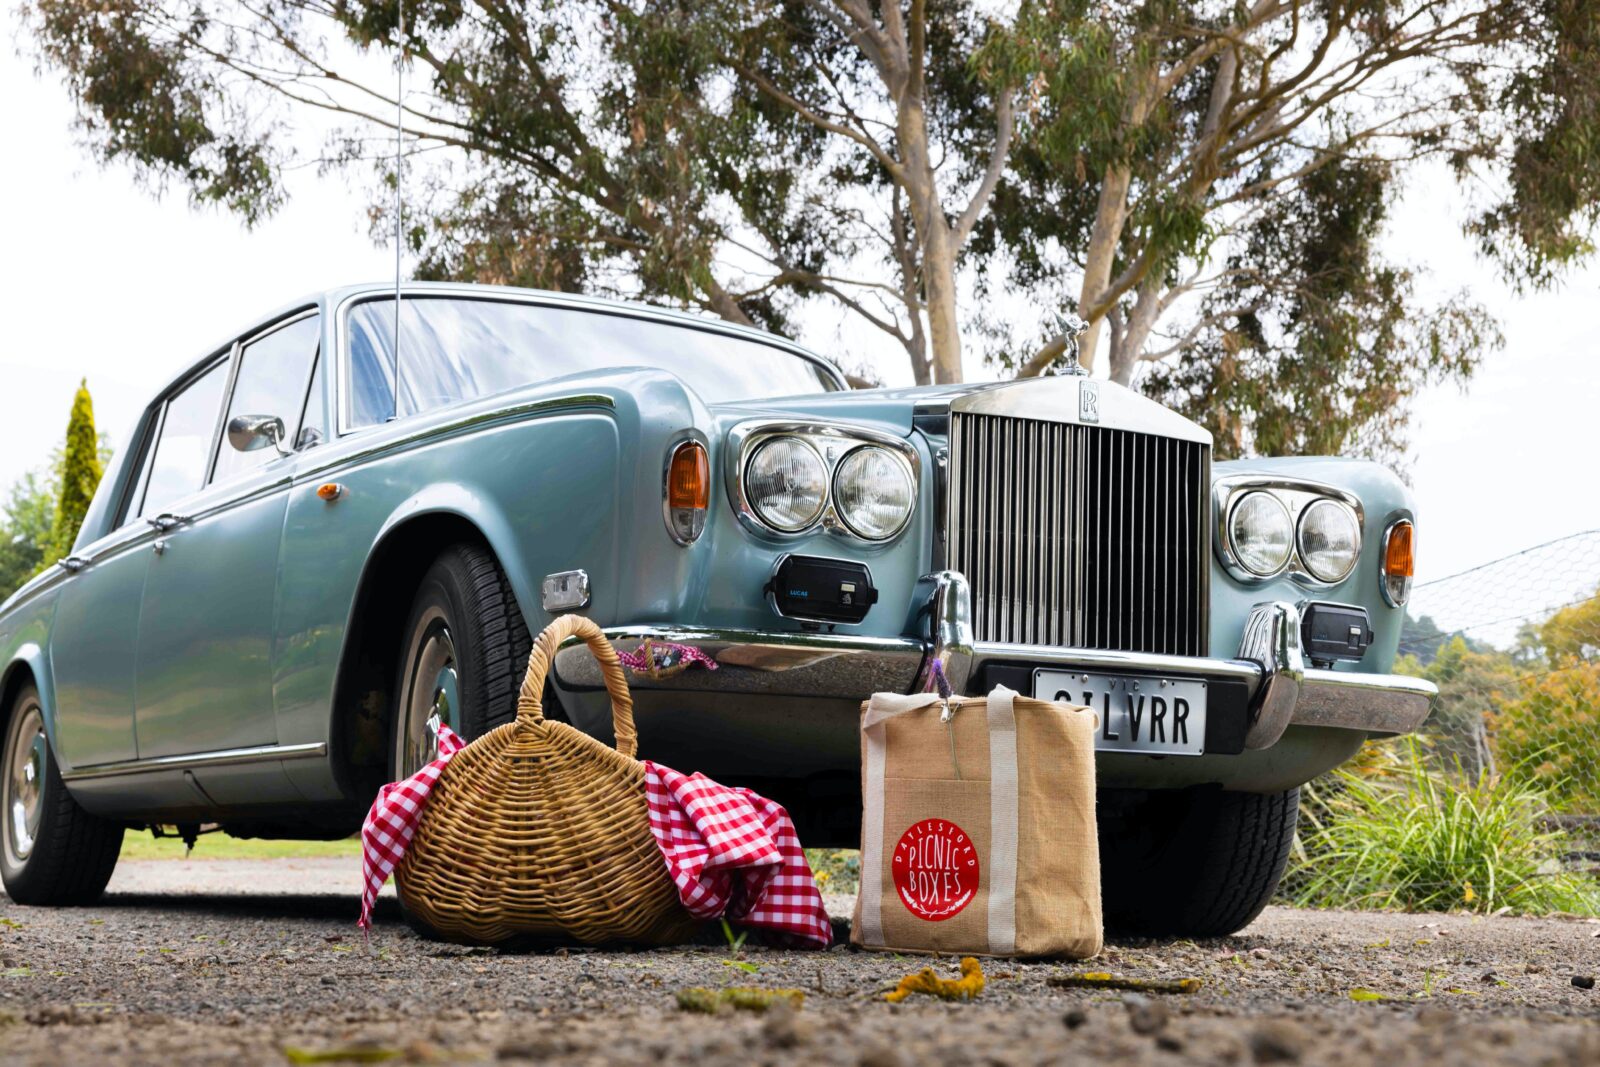 A silver-blue 1974 Rolls Royce with picnic baskets in front of the car